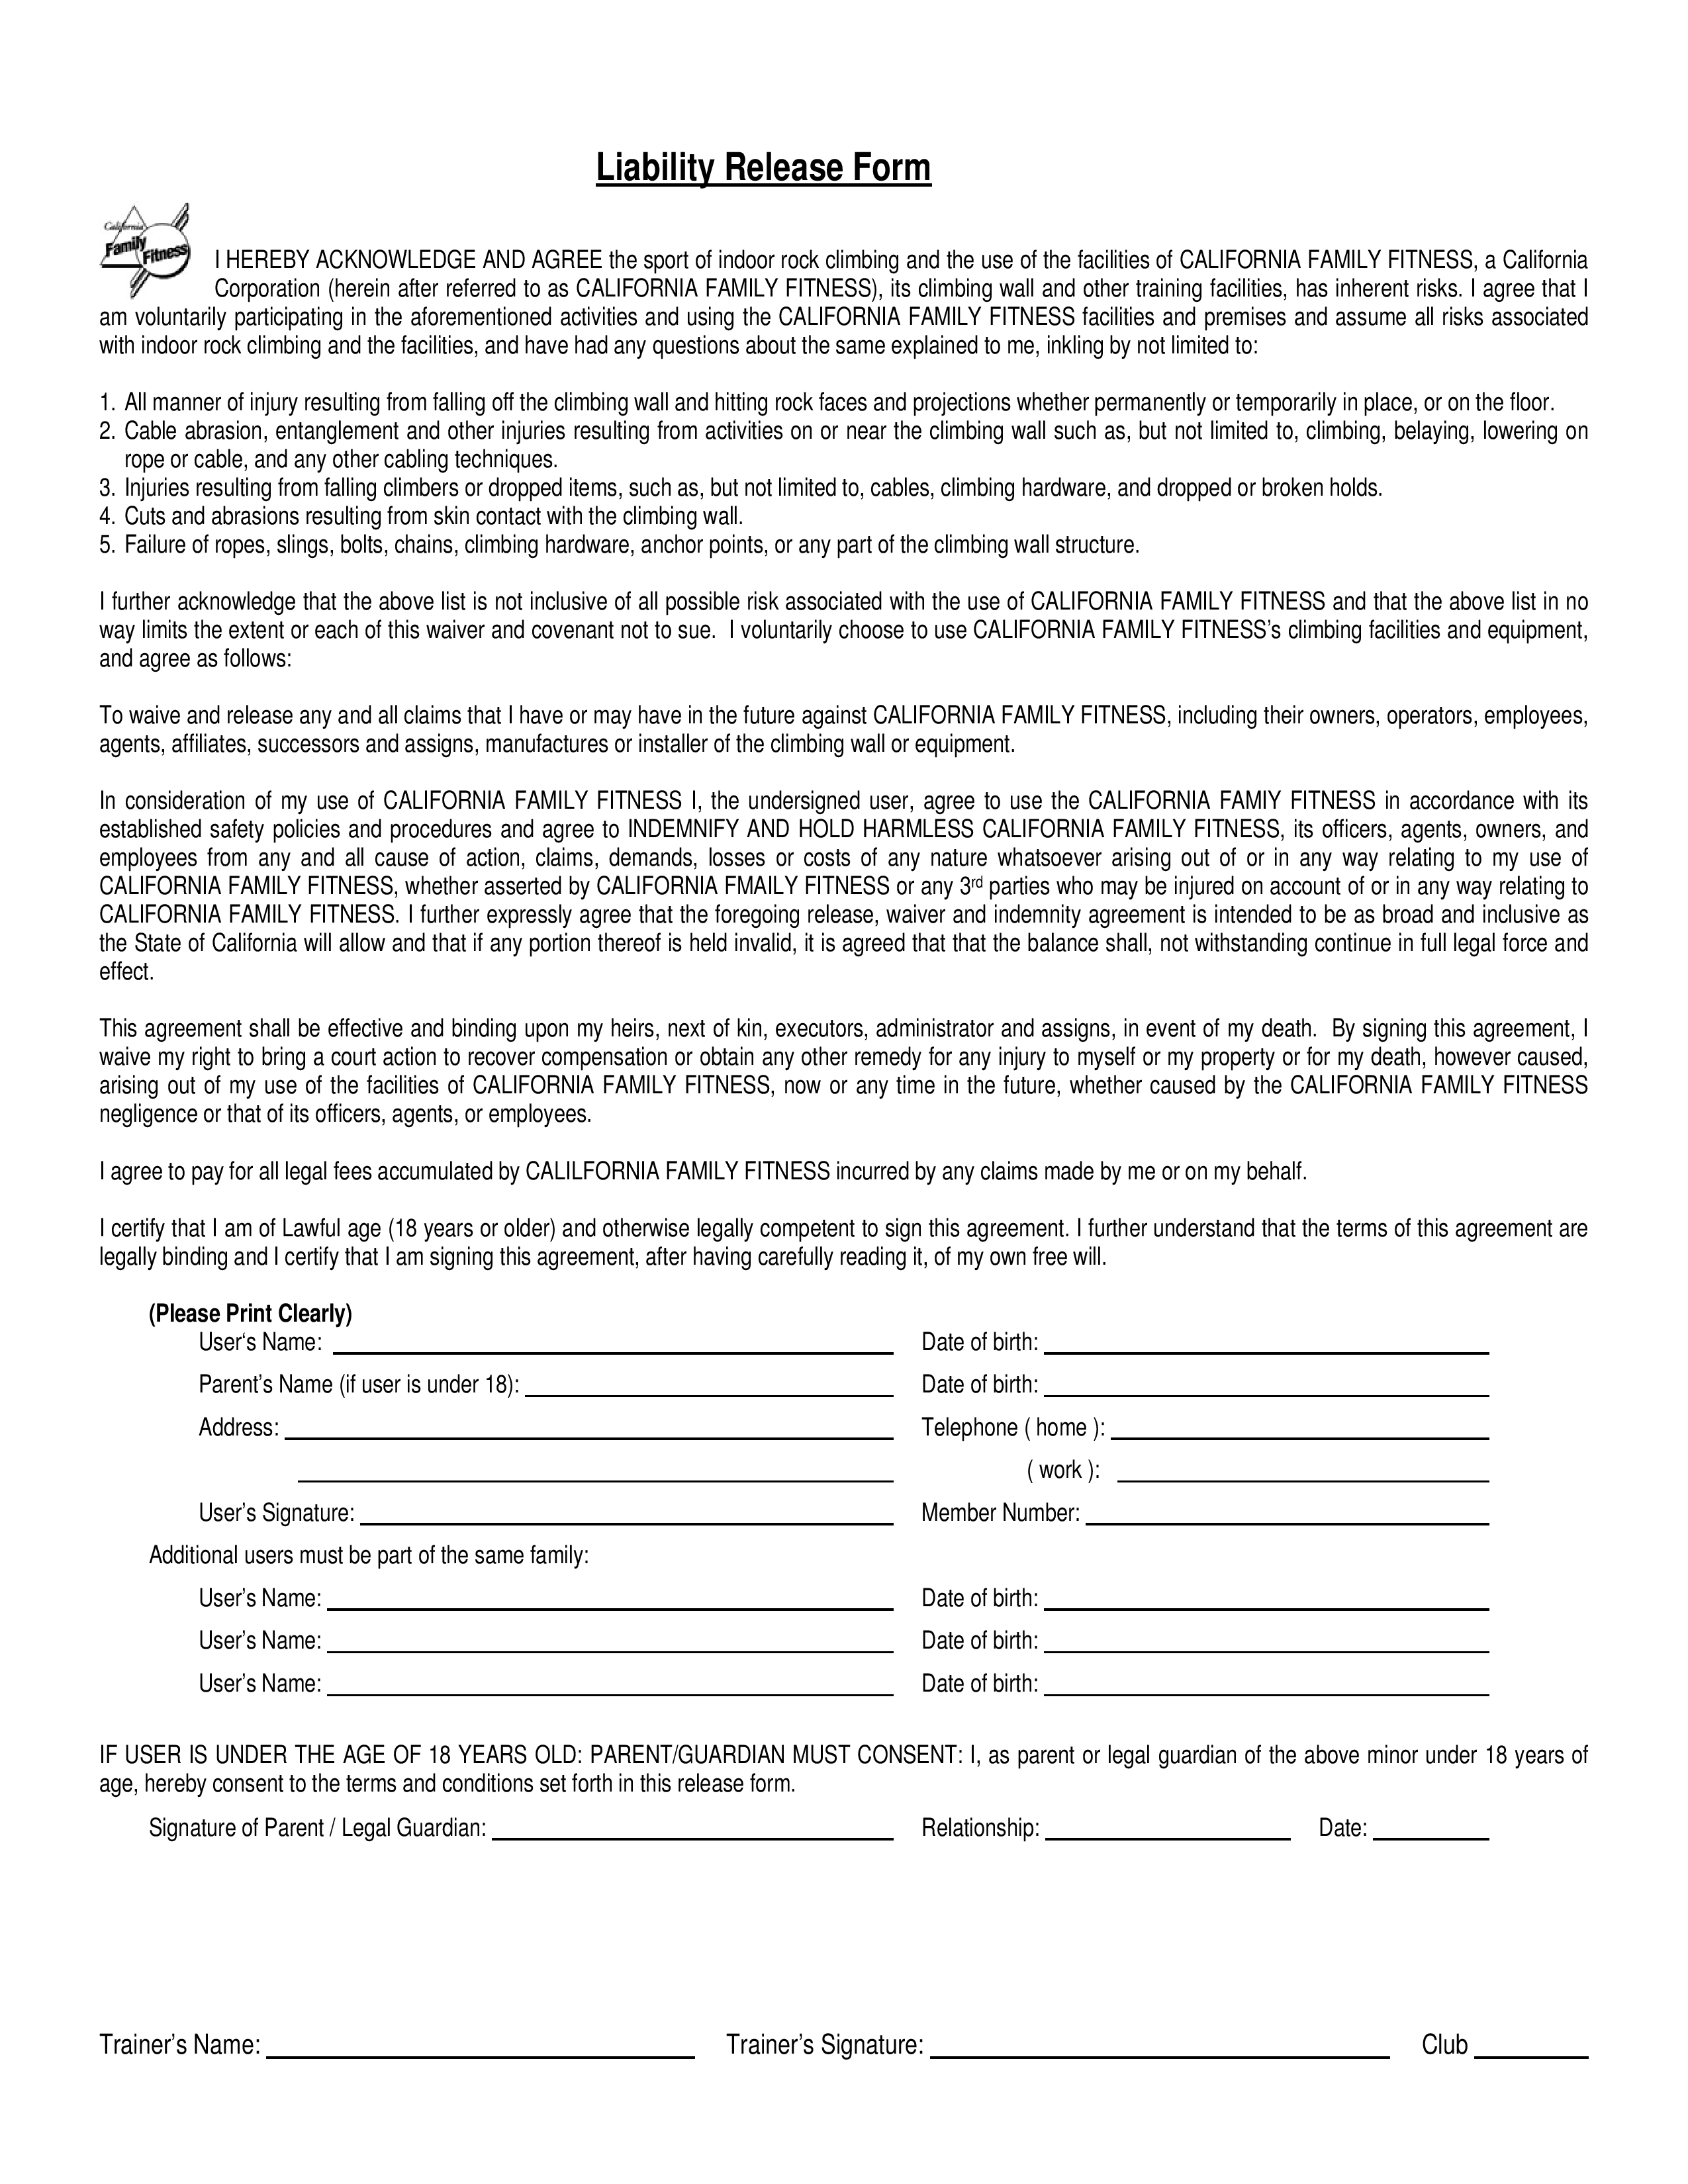 Liability Release Agreement Free California Family Fitness Liability Release Form Pdf Template